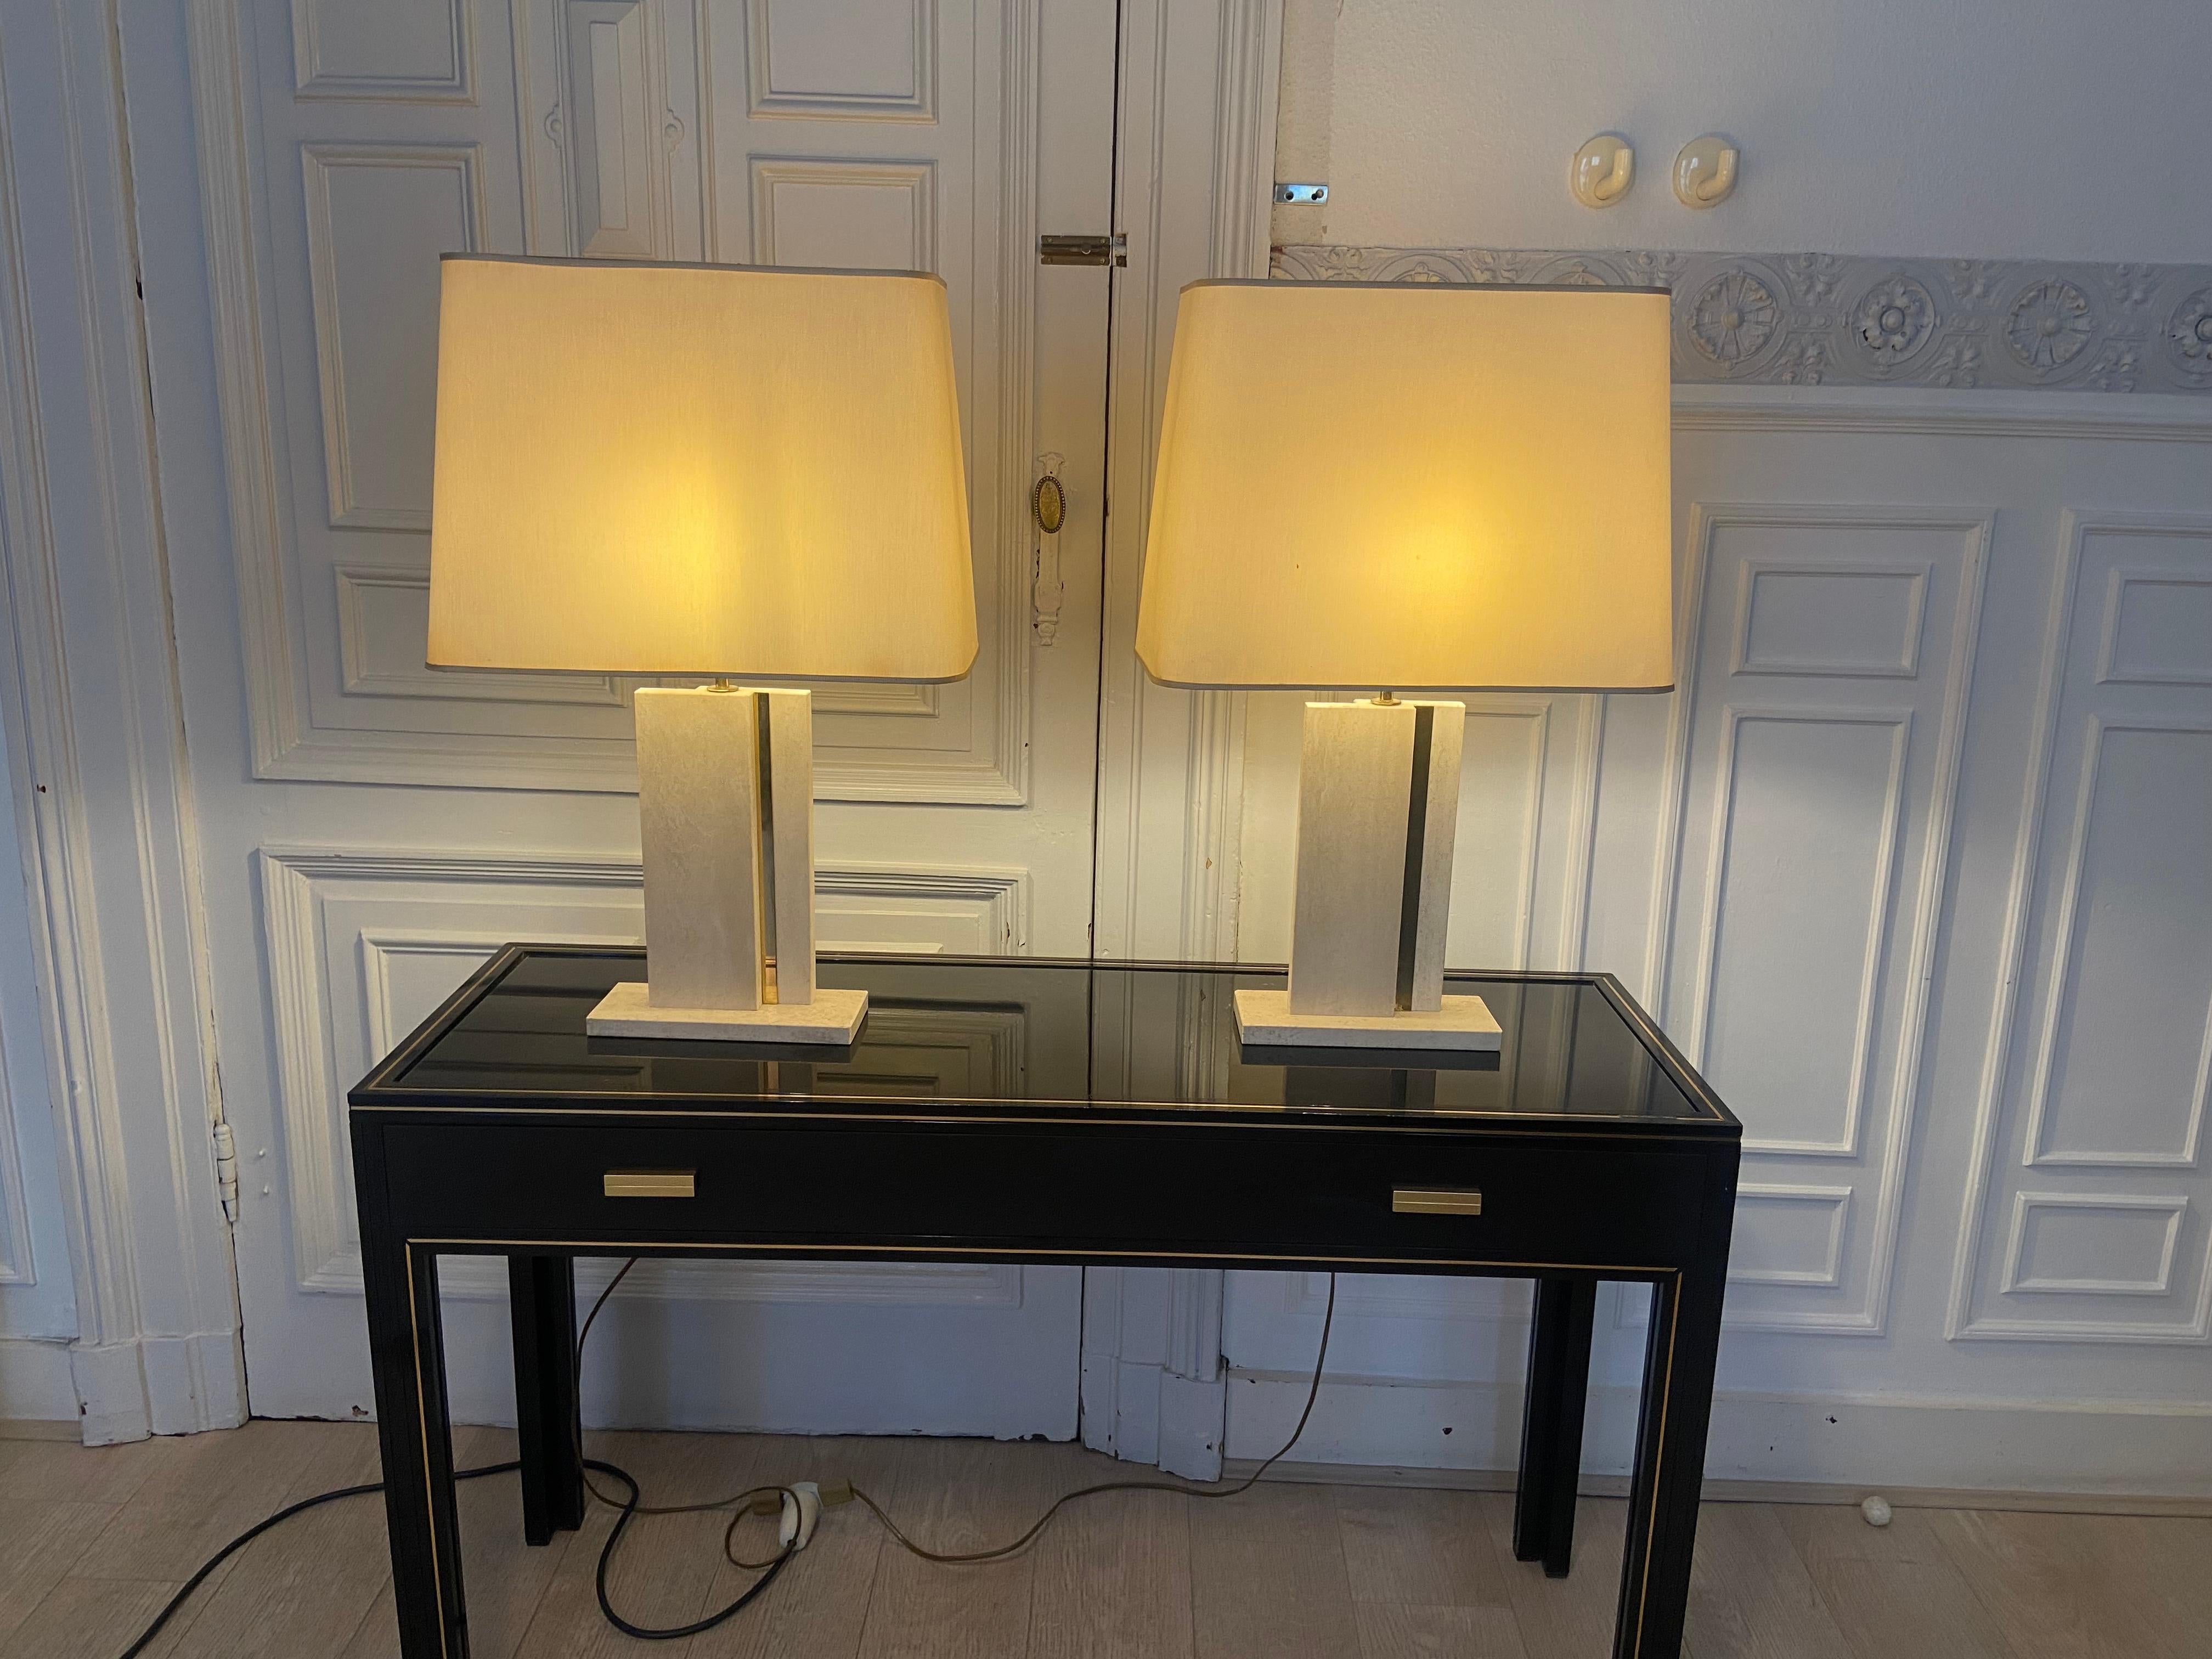 
Pair of travertine and brass lamps